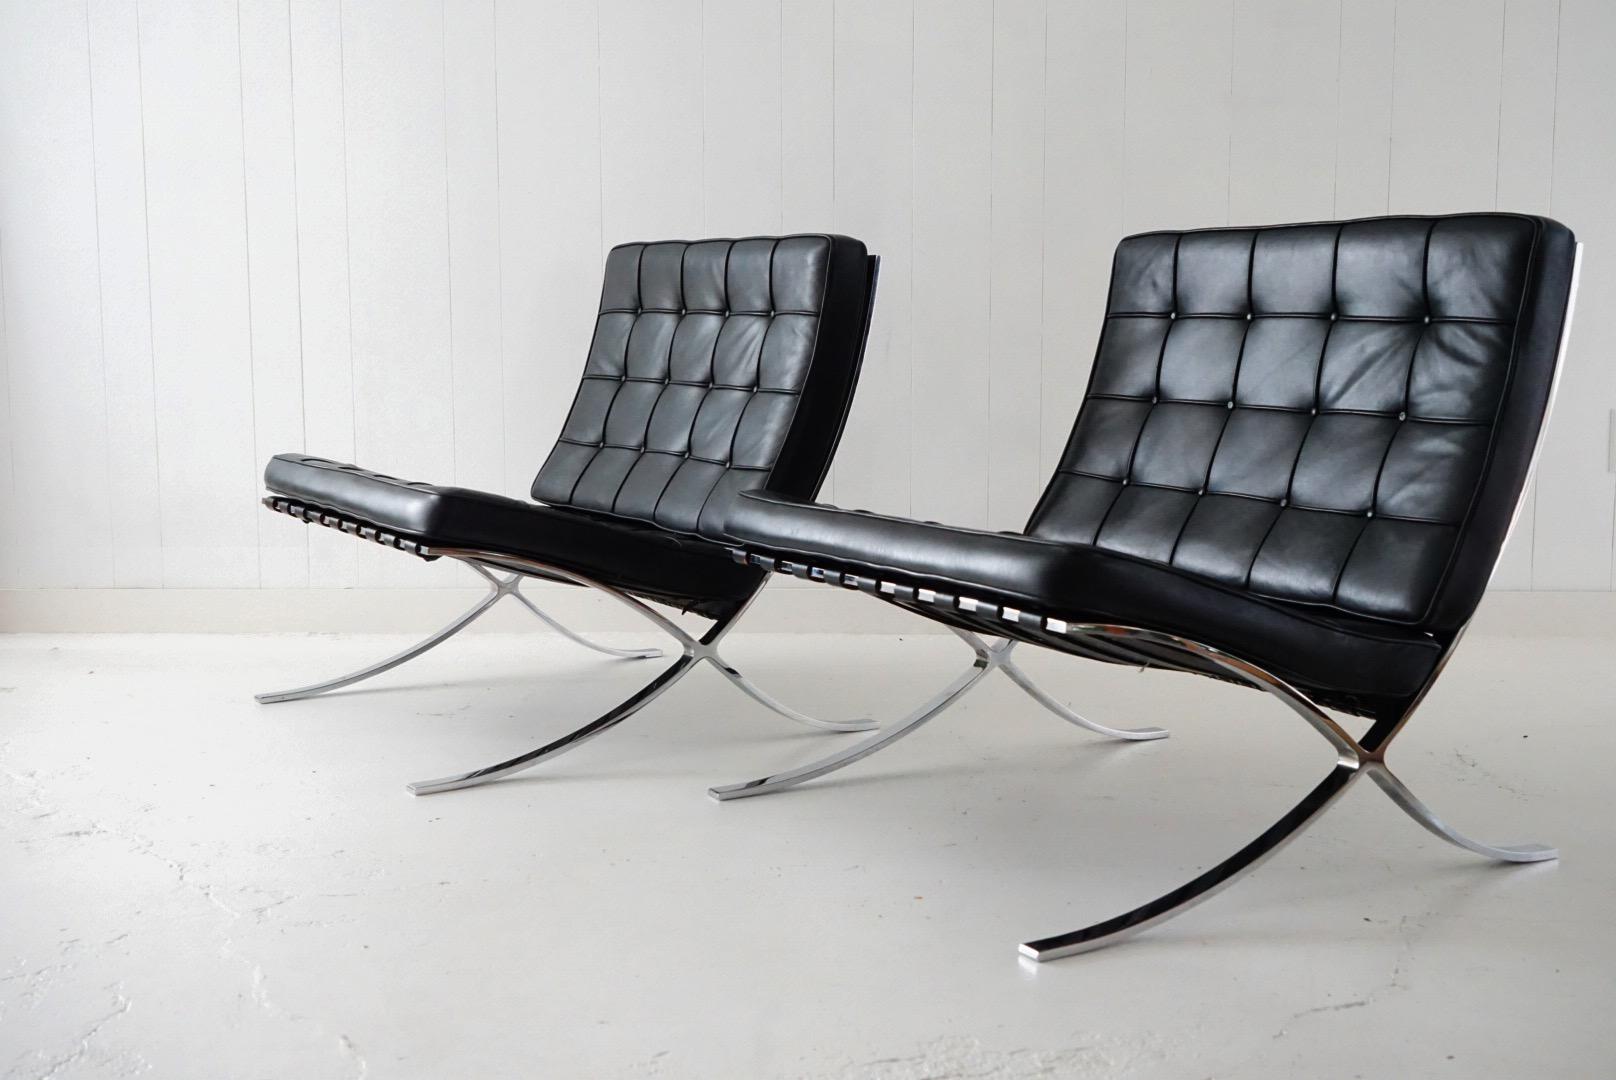 This pair of Classic black leather 'Barcelona' lounge chairs by Ludwig Mies van der Rohe for Knoll Studios is in excellent condition and triple-signed on each piece, with Knoll Studio labels and model number on each frame, Knoll repeat fabric under